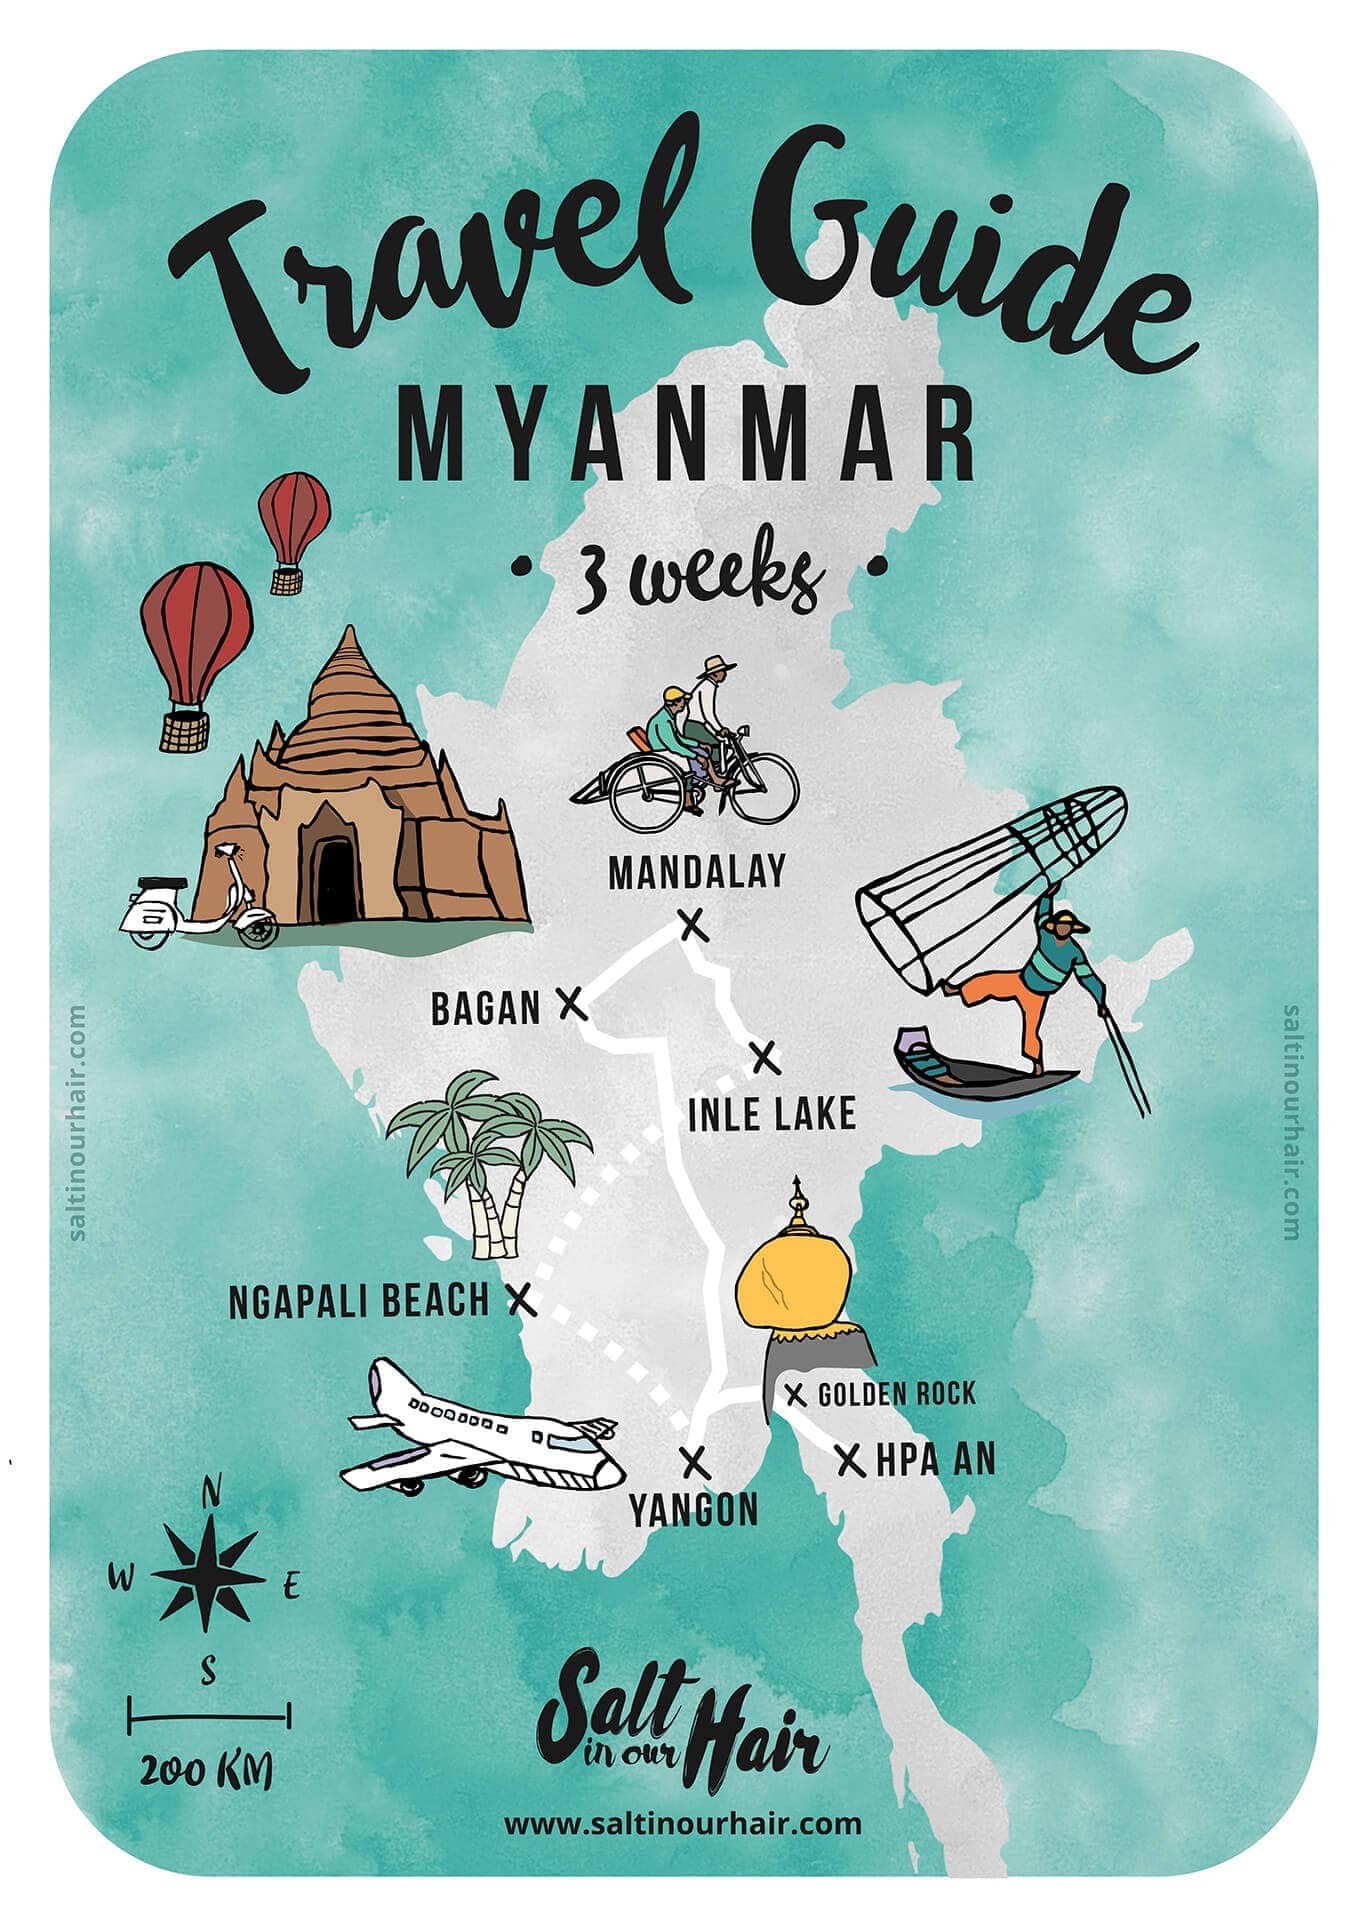 myanmar travel guide route map